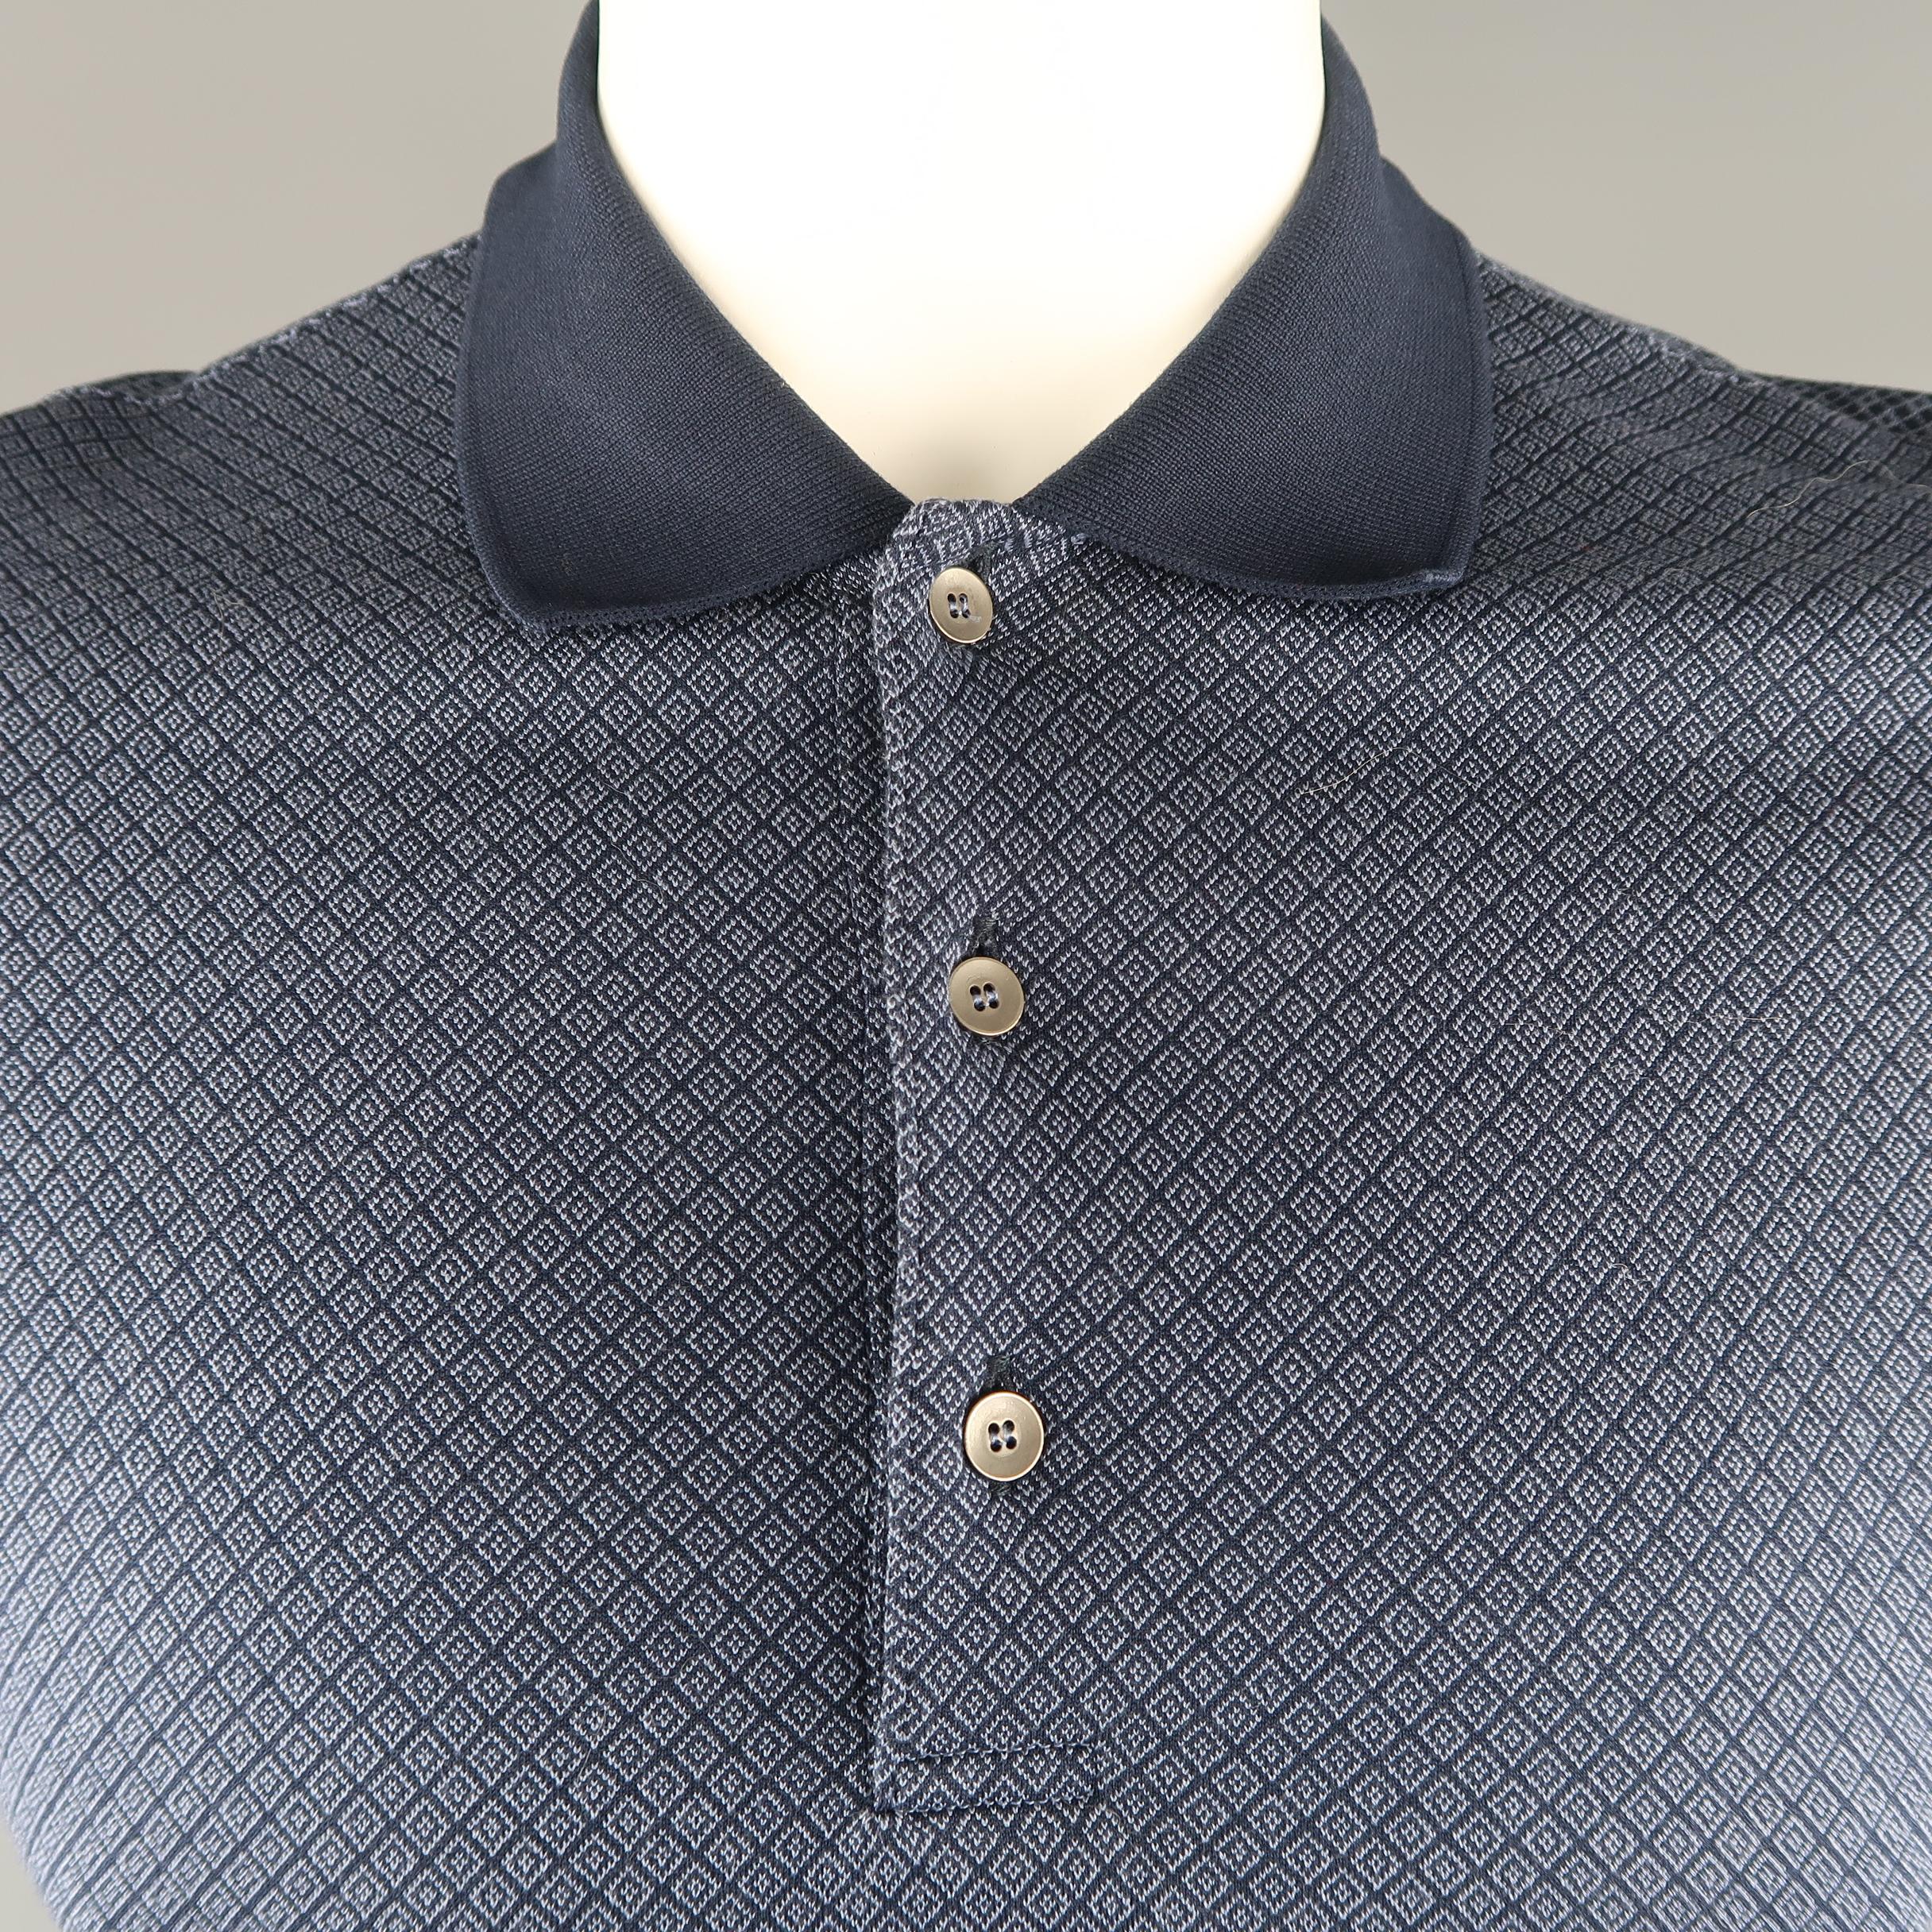 BOTTEGA VENETA POLO shirt features a navy tone rhombus print in woven cotton, button down front and a mix of fabrics. 

Made in Italy. 
Excellent Pre-Owned Condition.
Marked: 50 IT
 
Measurements:
 
Shoulder: 17  in.
Chest: 41 in.
Sleeve: 8.5 